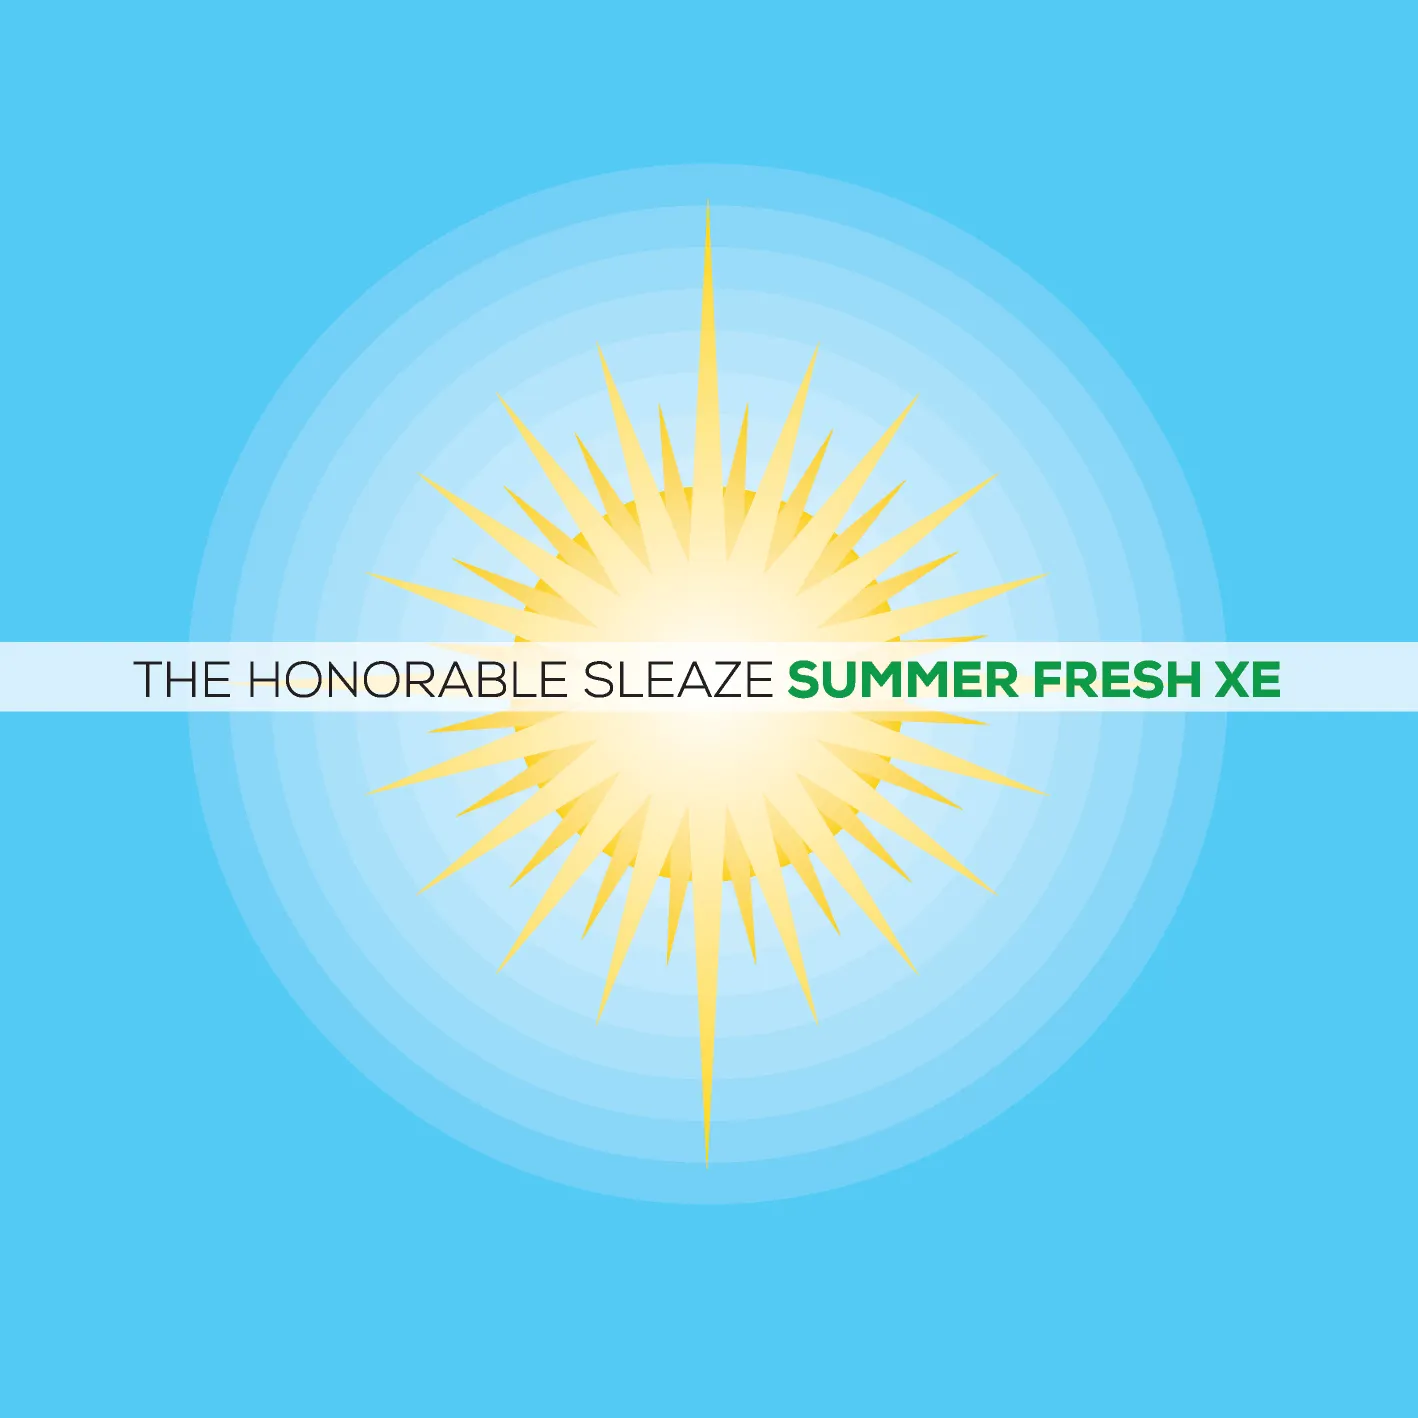 Album cover for “Summer Fresh XE” by The Honorable Sleaze